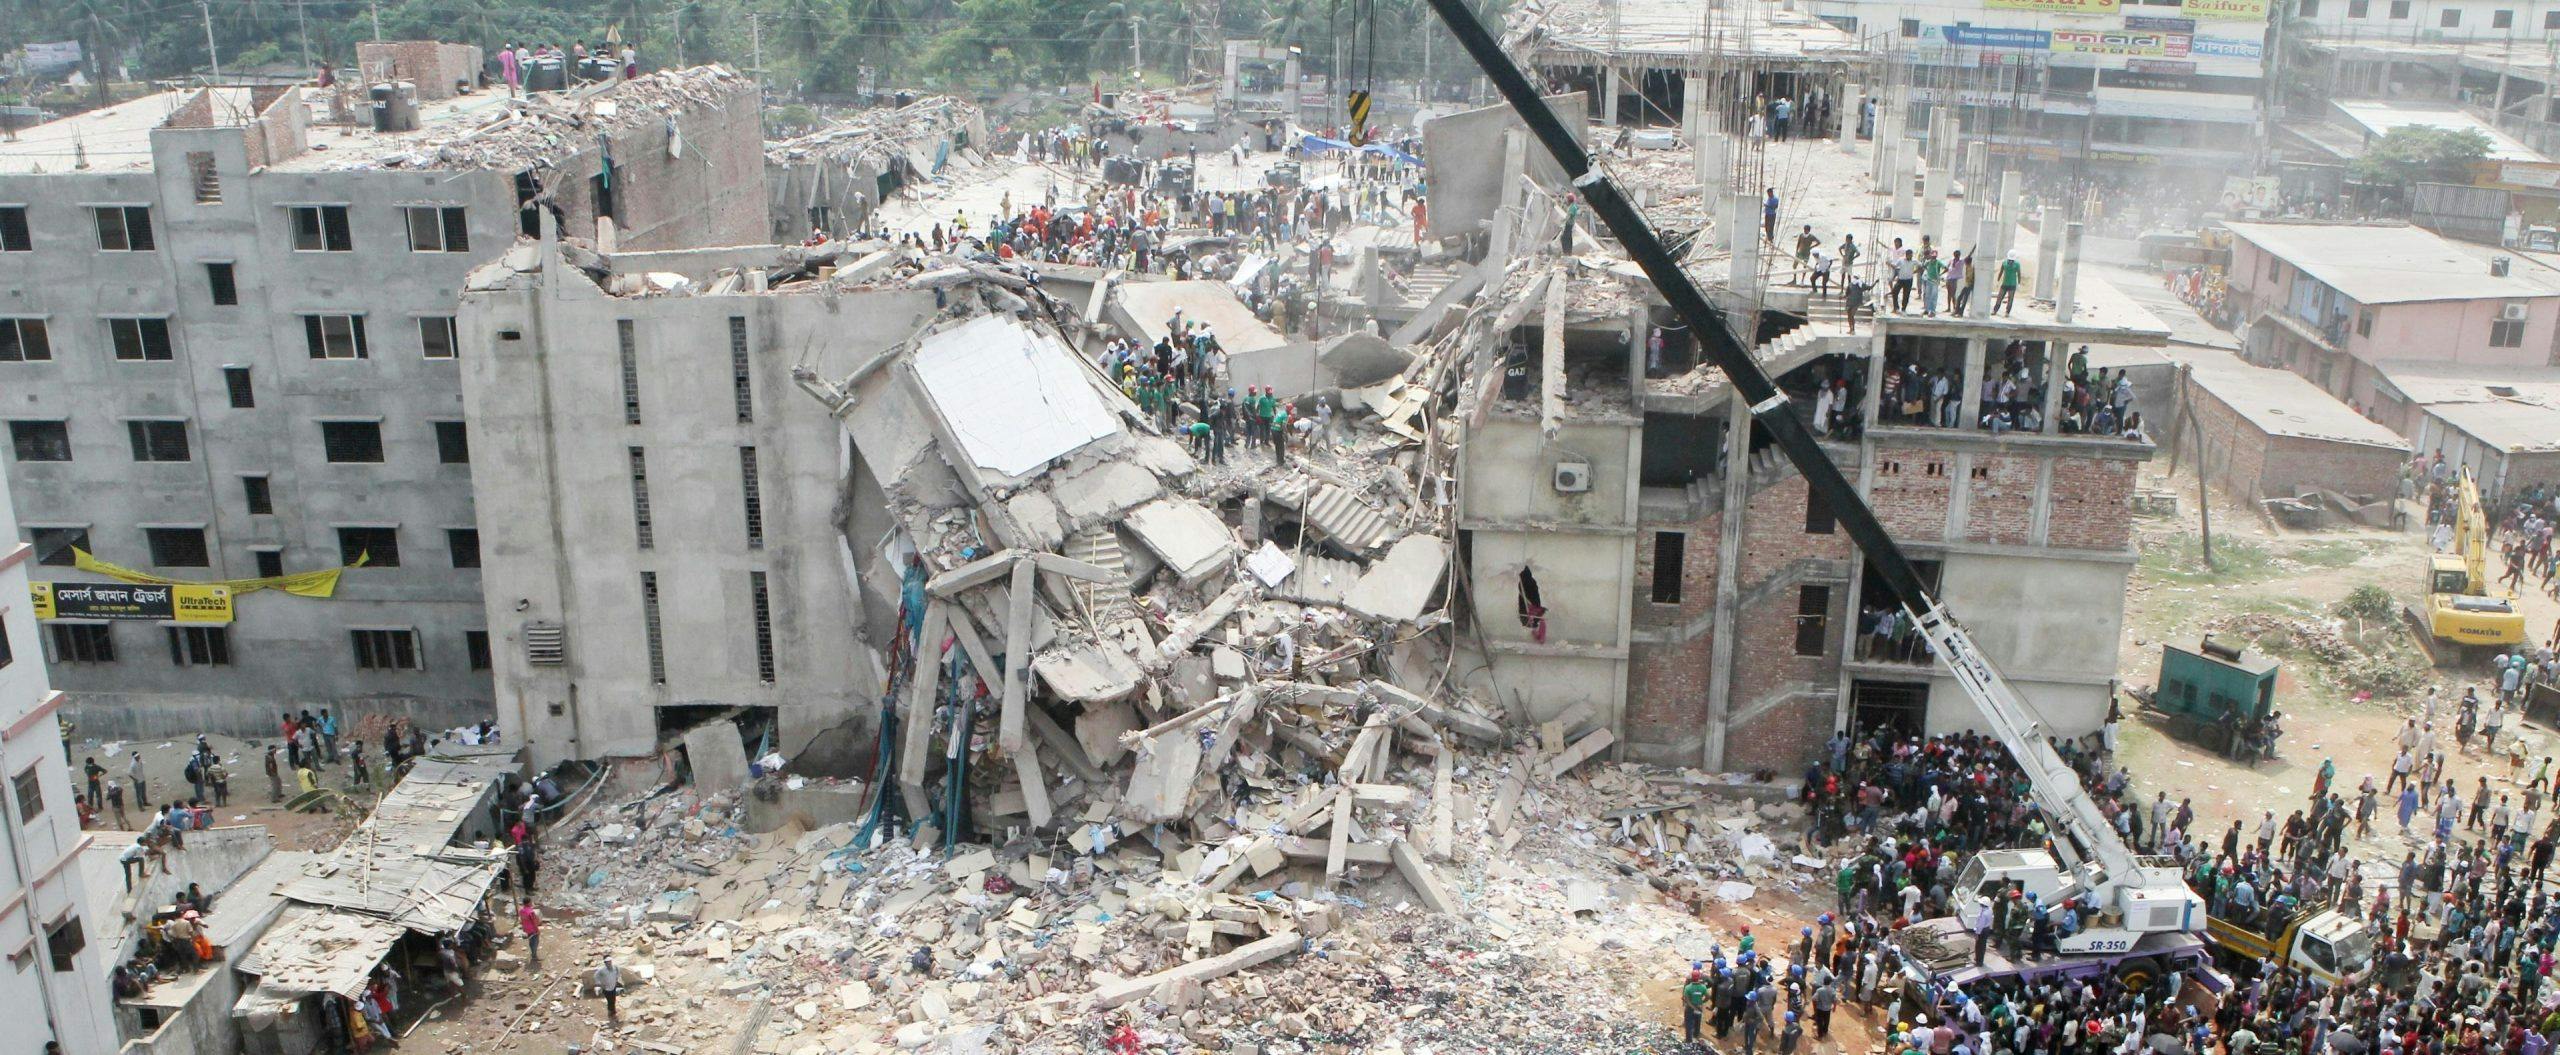 Rescuers climb over debris from a large collapsed building. A large crowd of people gather round a crane, which is being used to remove pieces of debris.